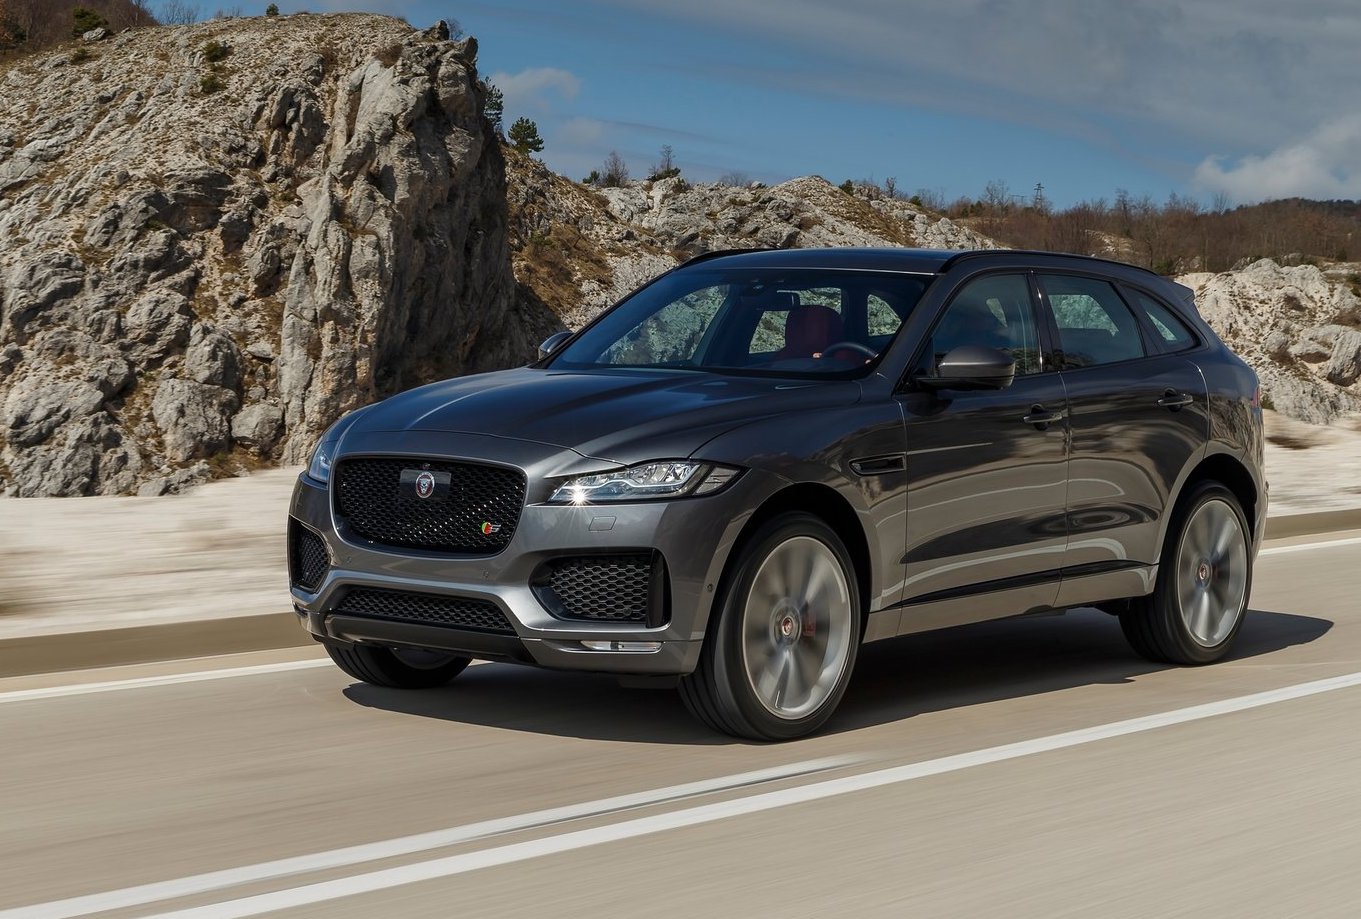 Jaguar Land Rover sales keep soaring, led by F-Pace SUV